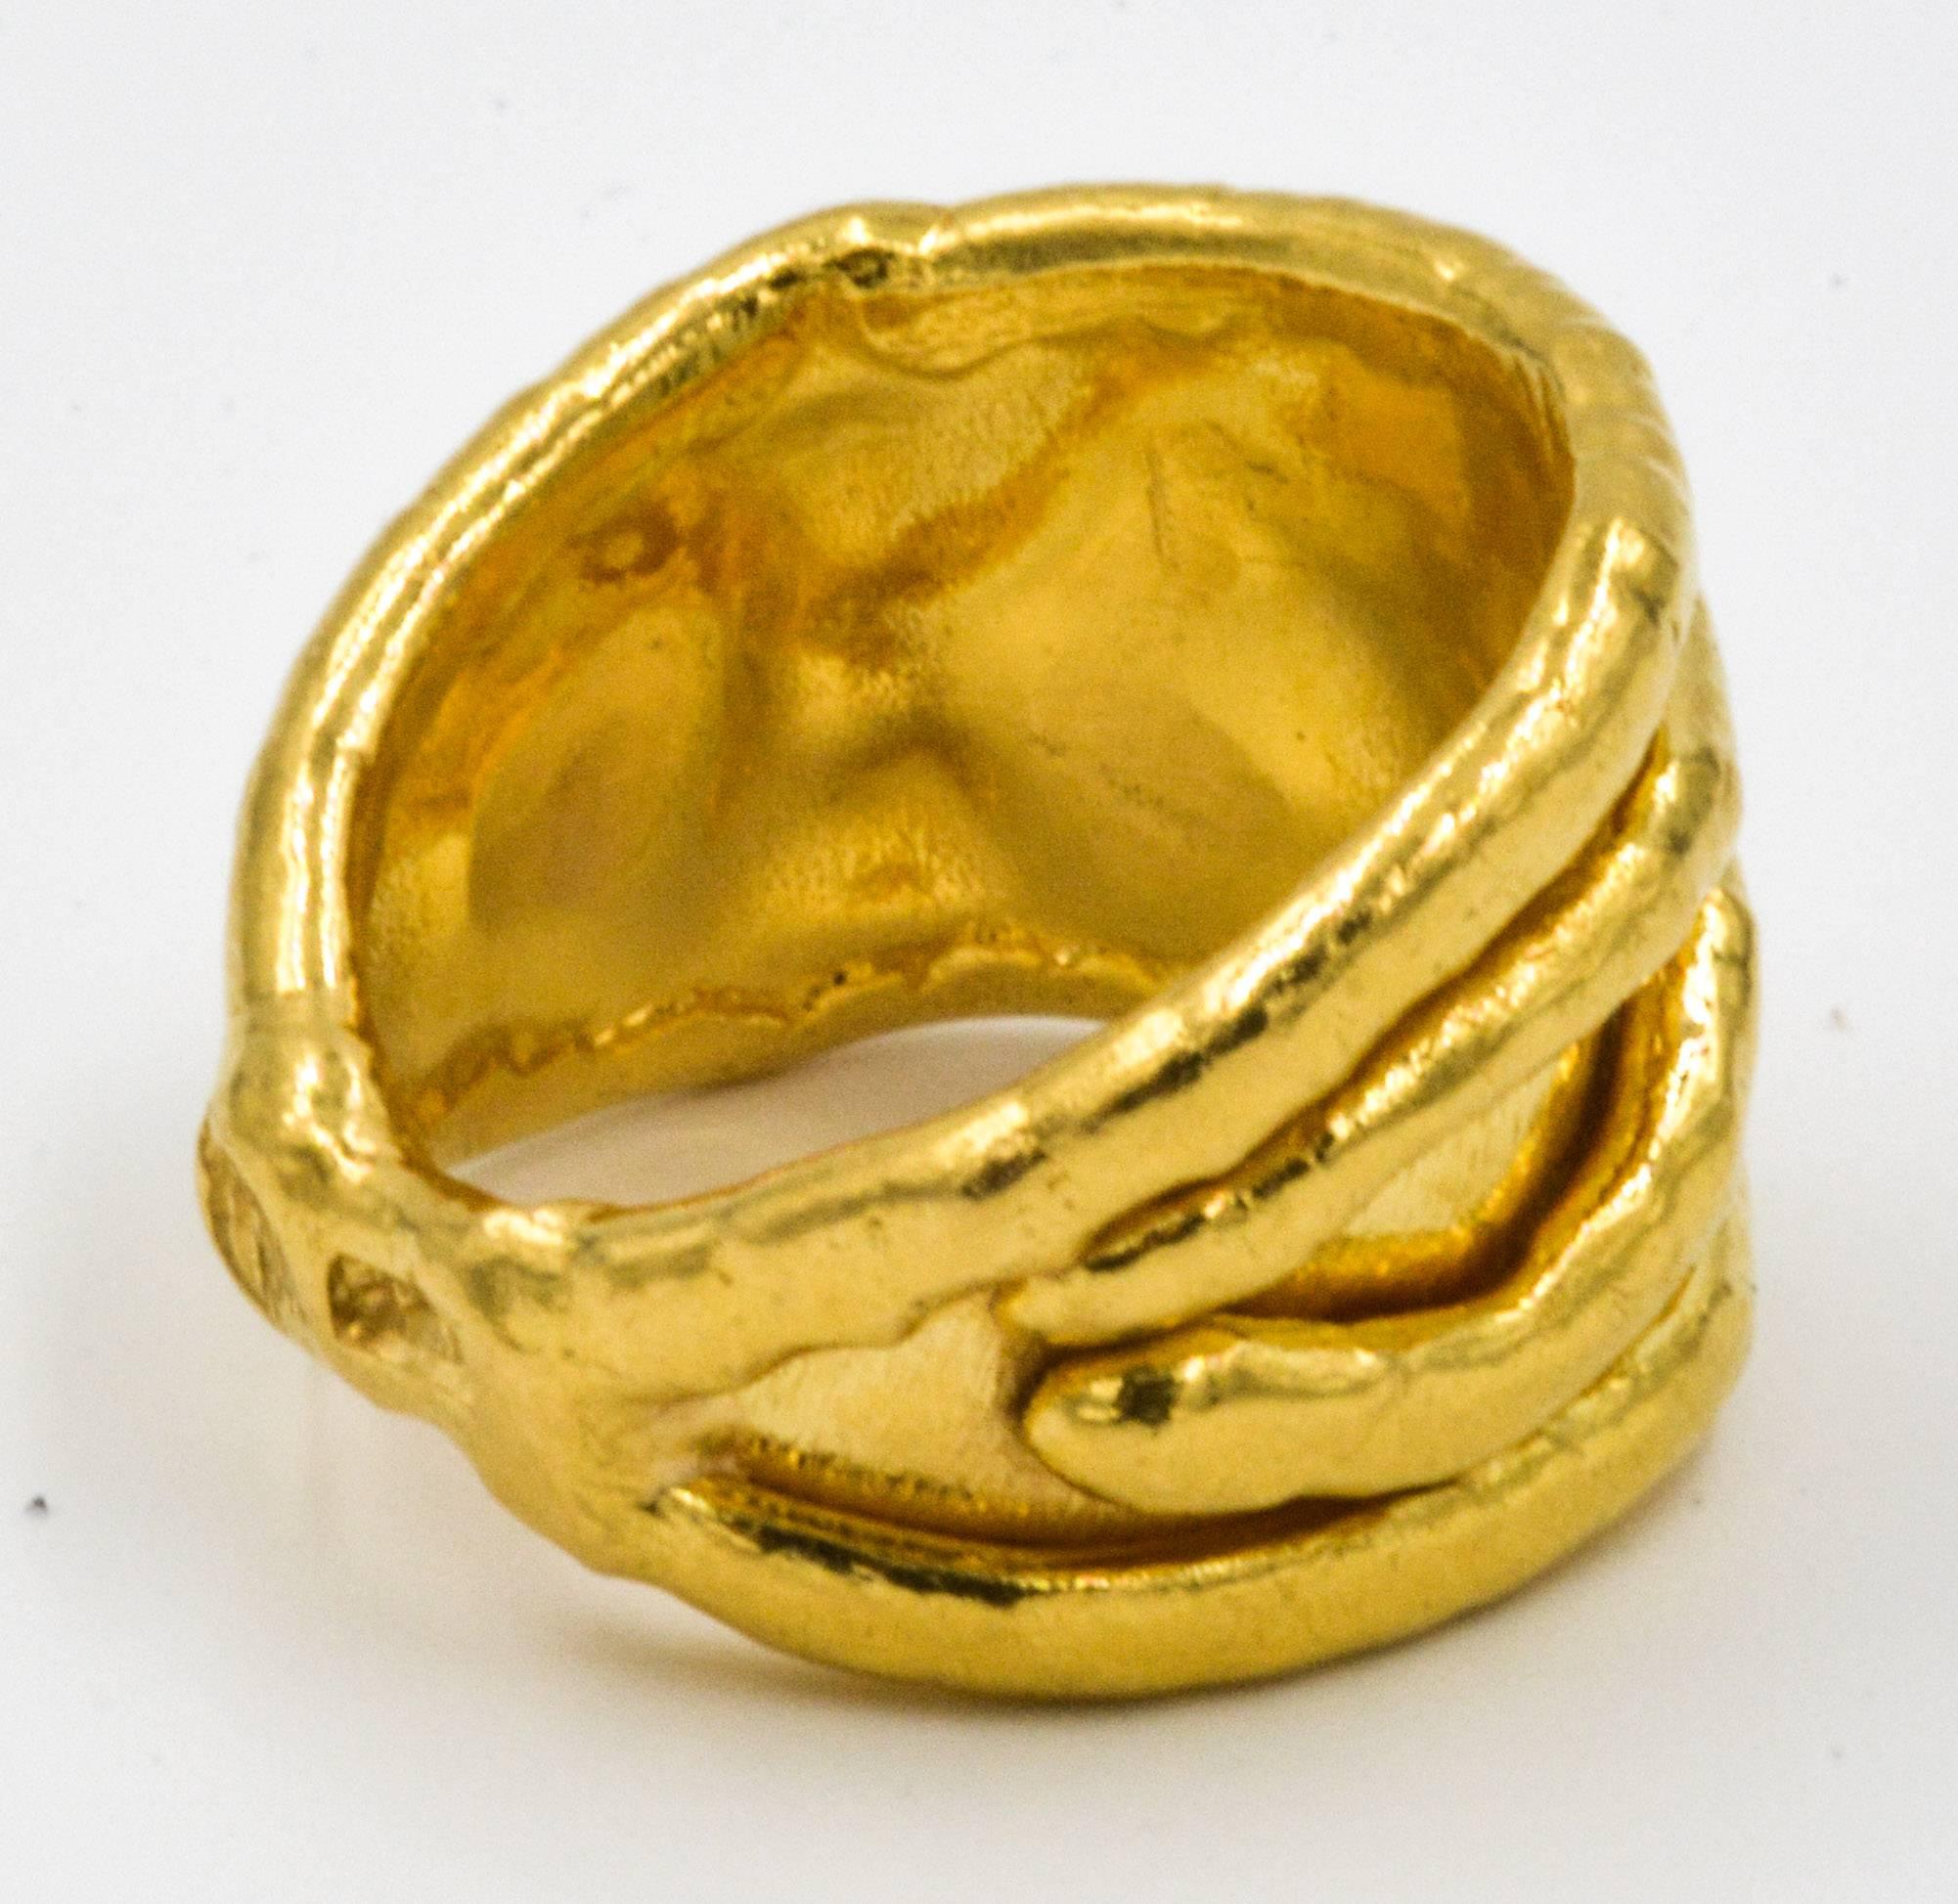 This classic Jean Mahie ring features the signature 